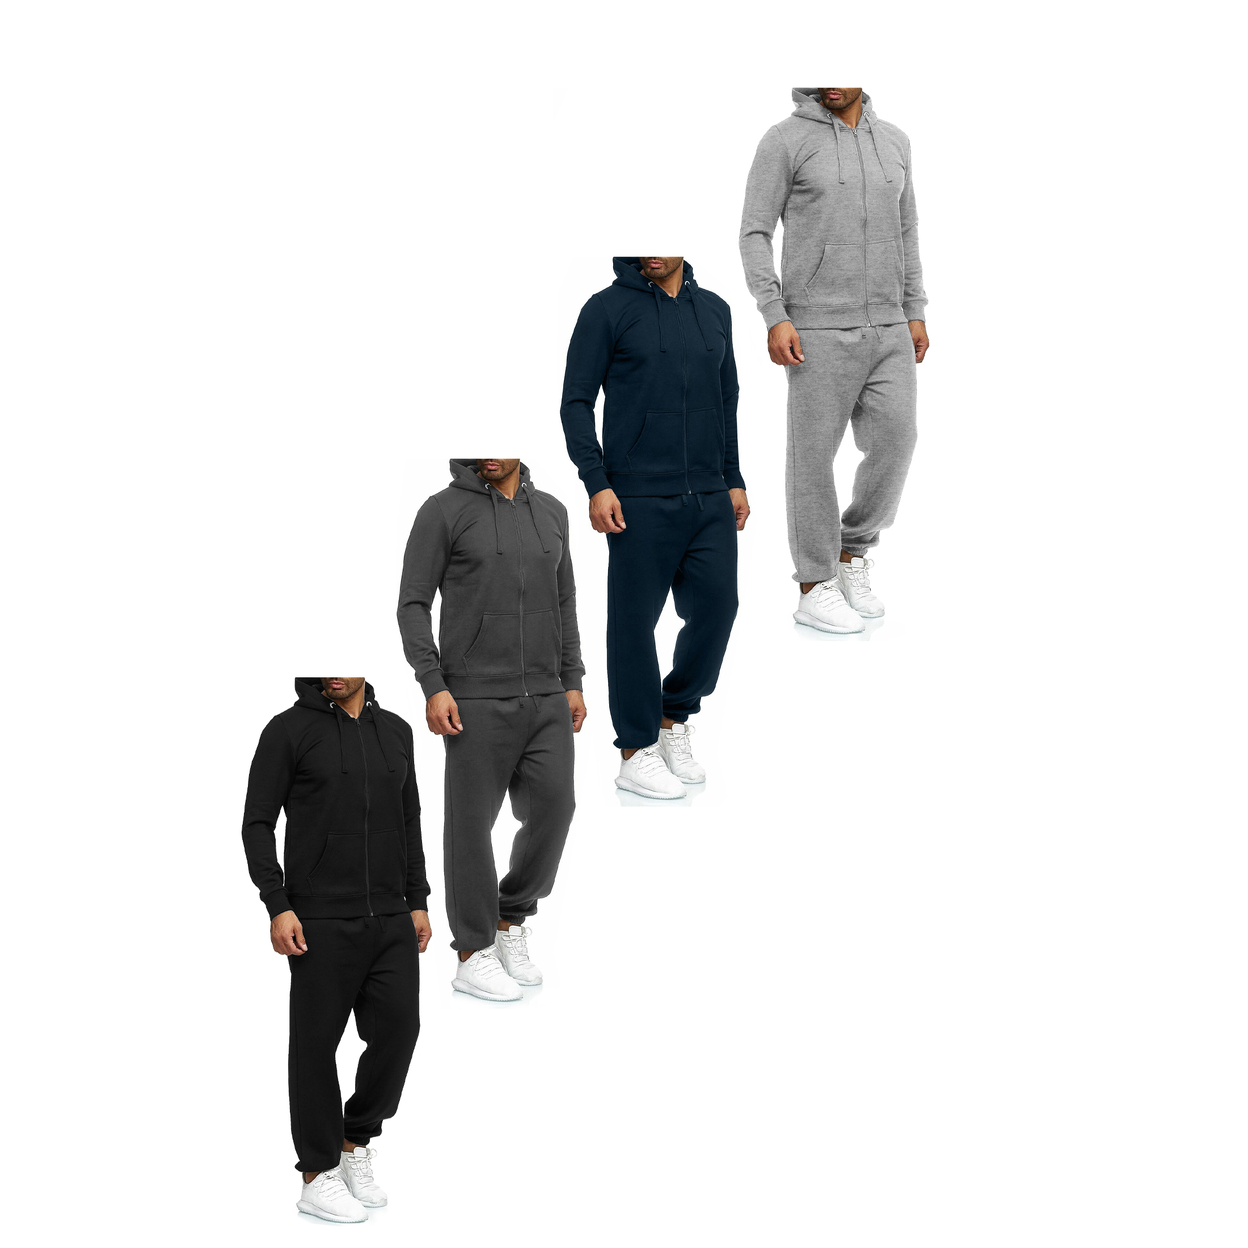 Multi-Pack: Men's Casual Big & Tall Athletic Active Winter Warm Fleece Lined Full Zip Tracksuit Jogger Set - Charcoal, 1-pack, Small